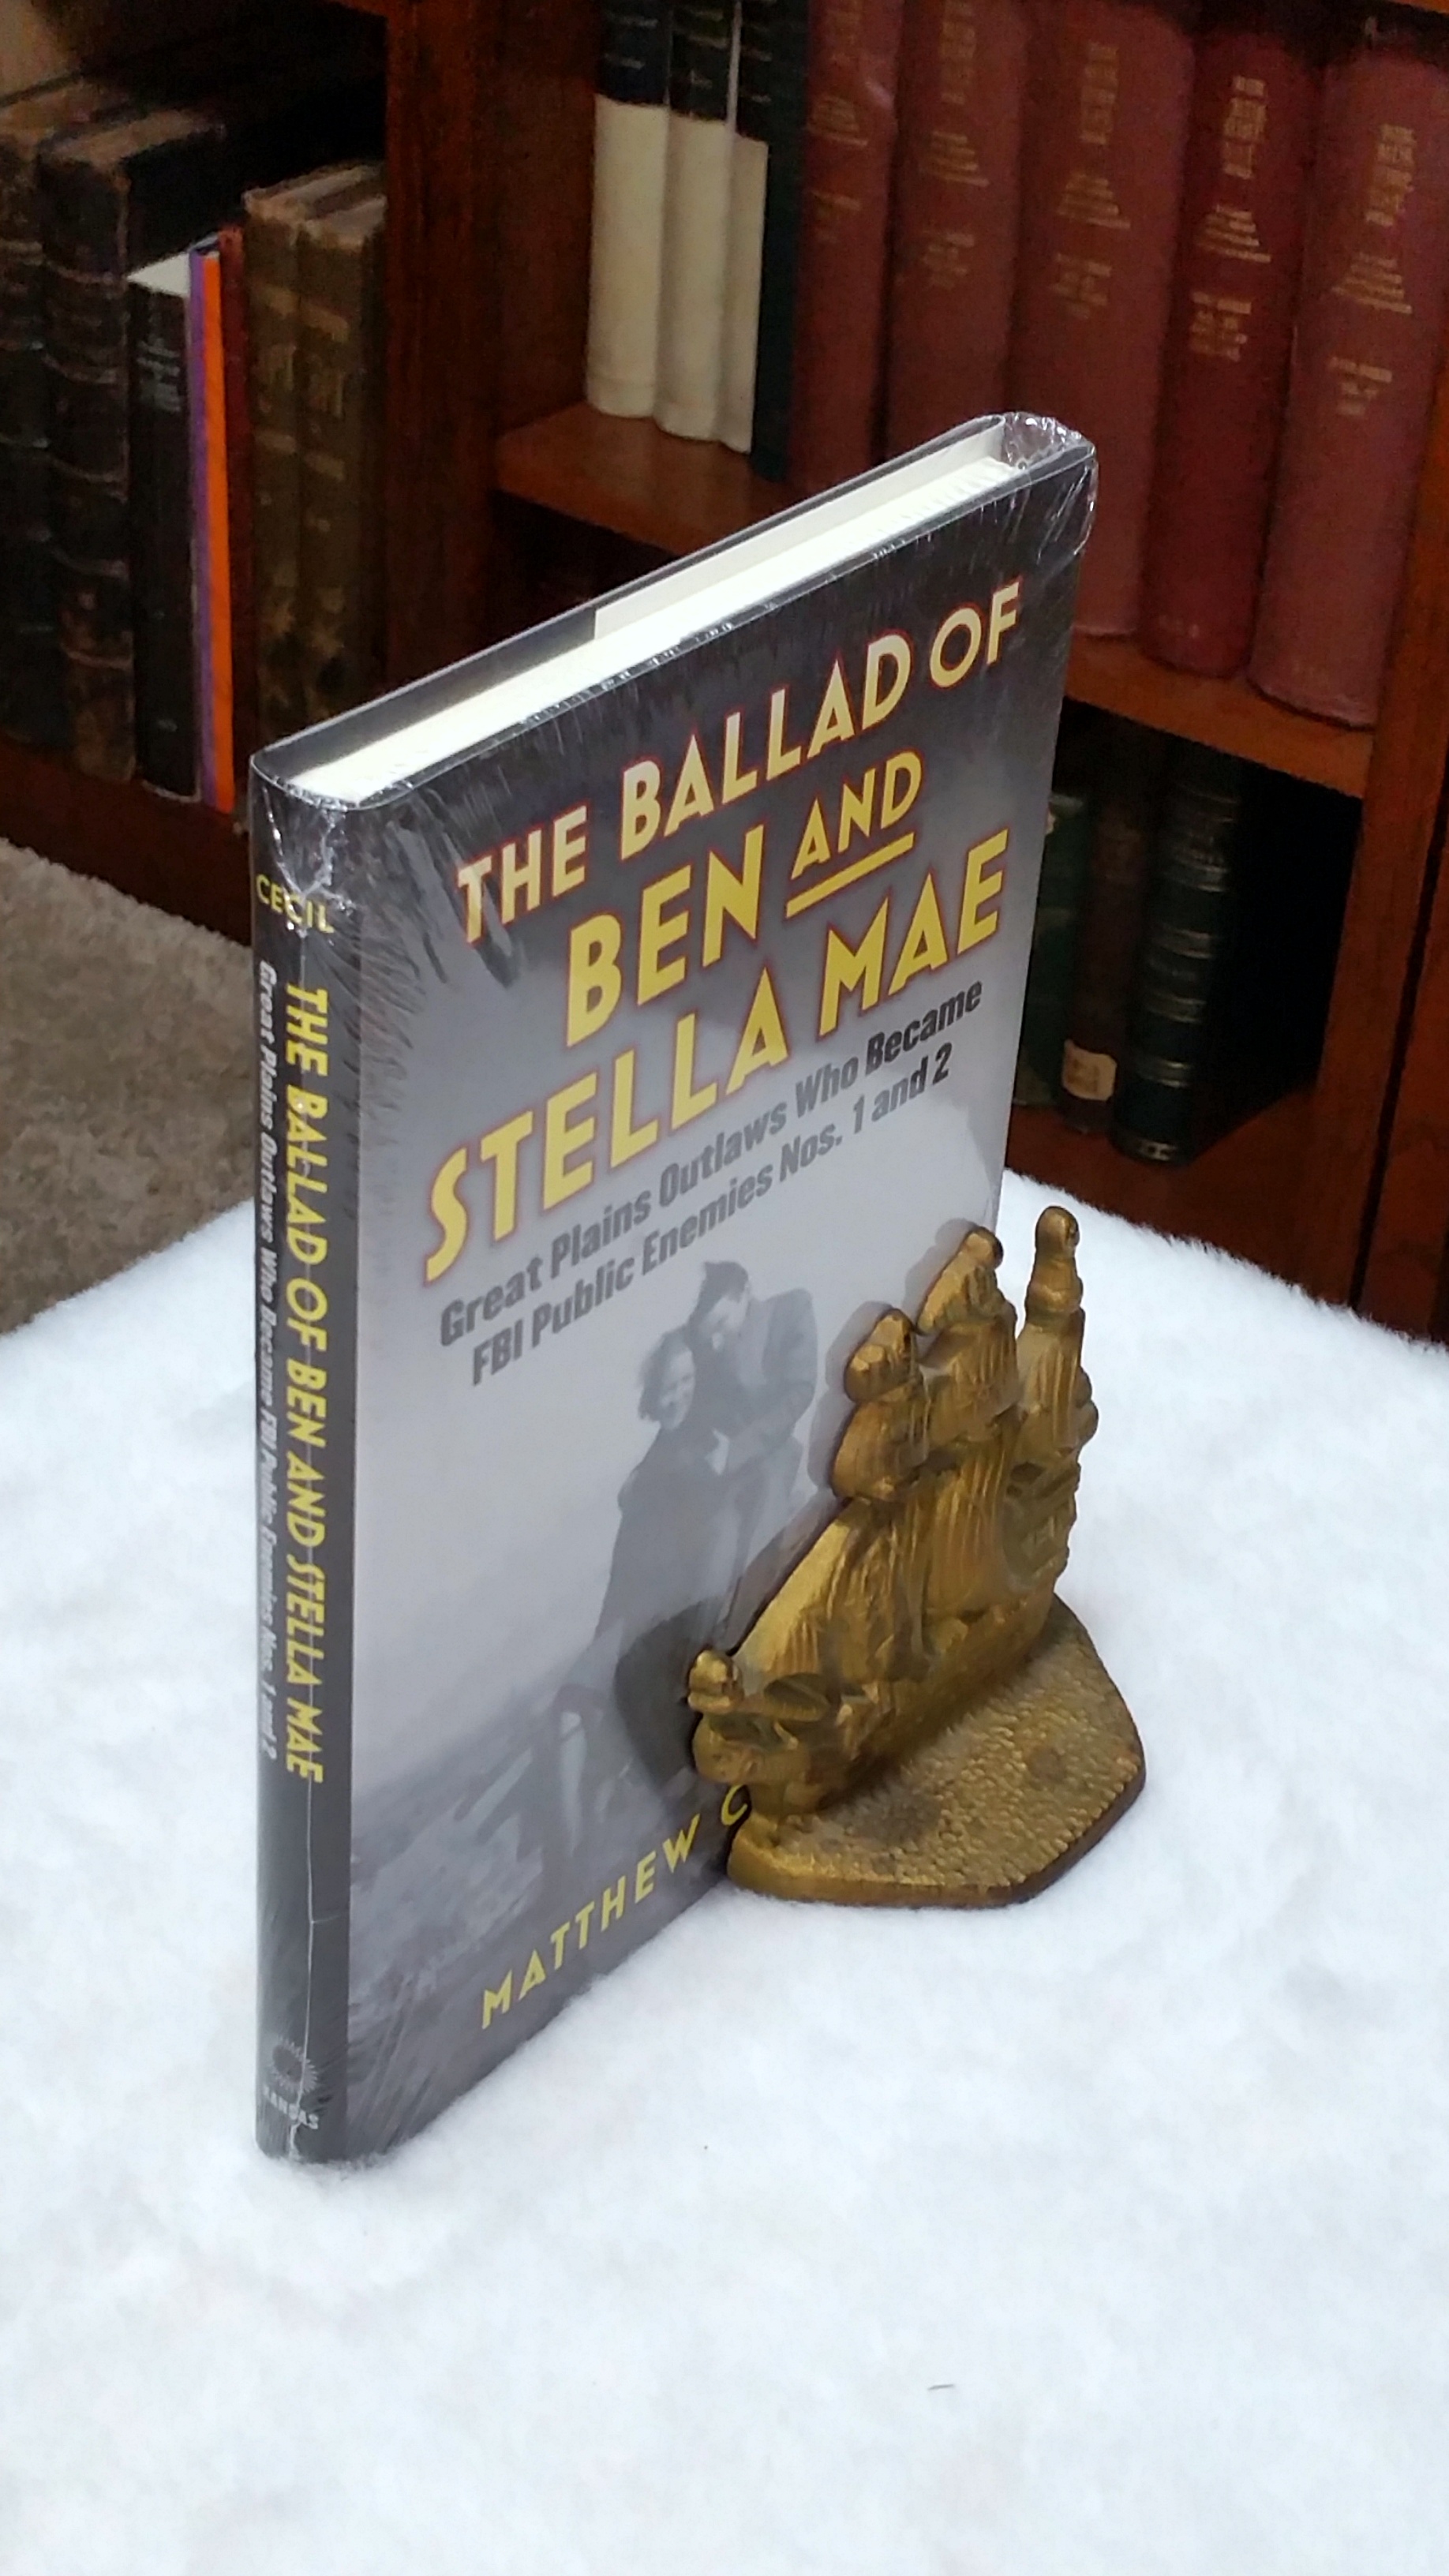 Image for The Ballad of Ben and Stella Mae:  Great Plains Outlaws Who Became FBI Enemies Nos. 1 and 2